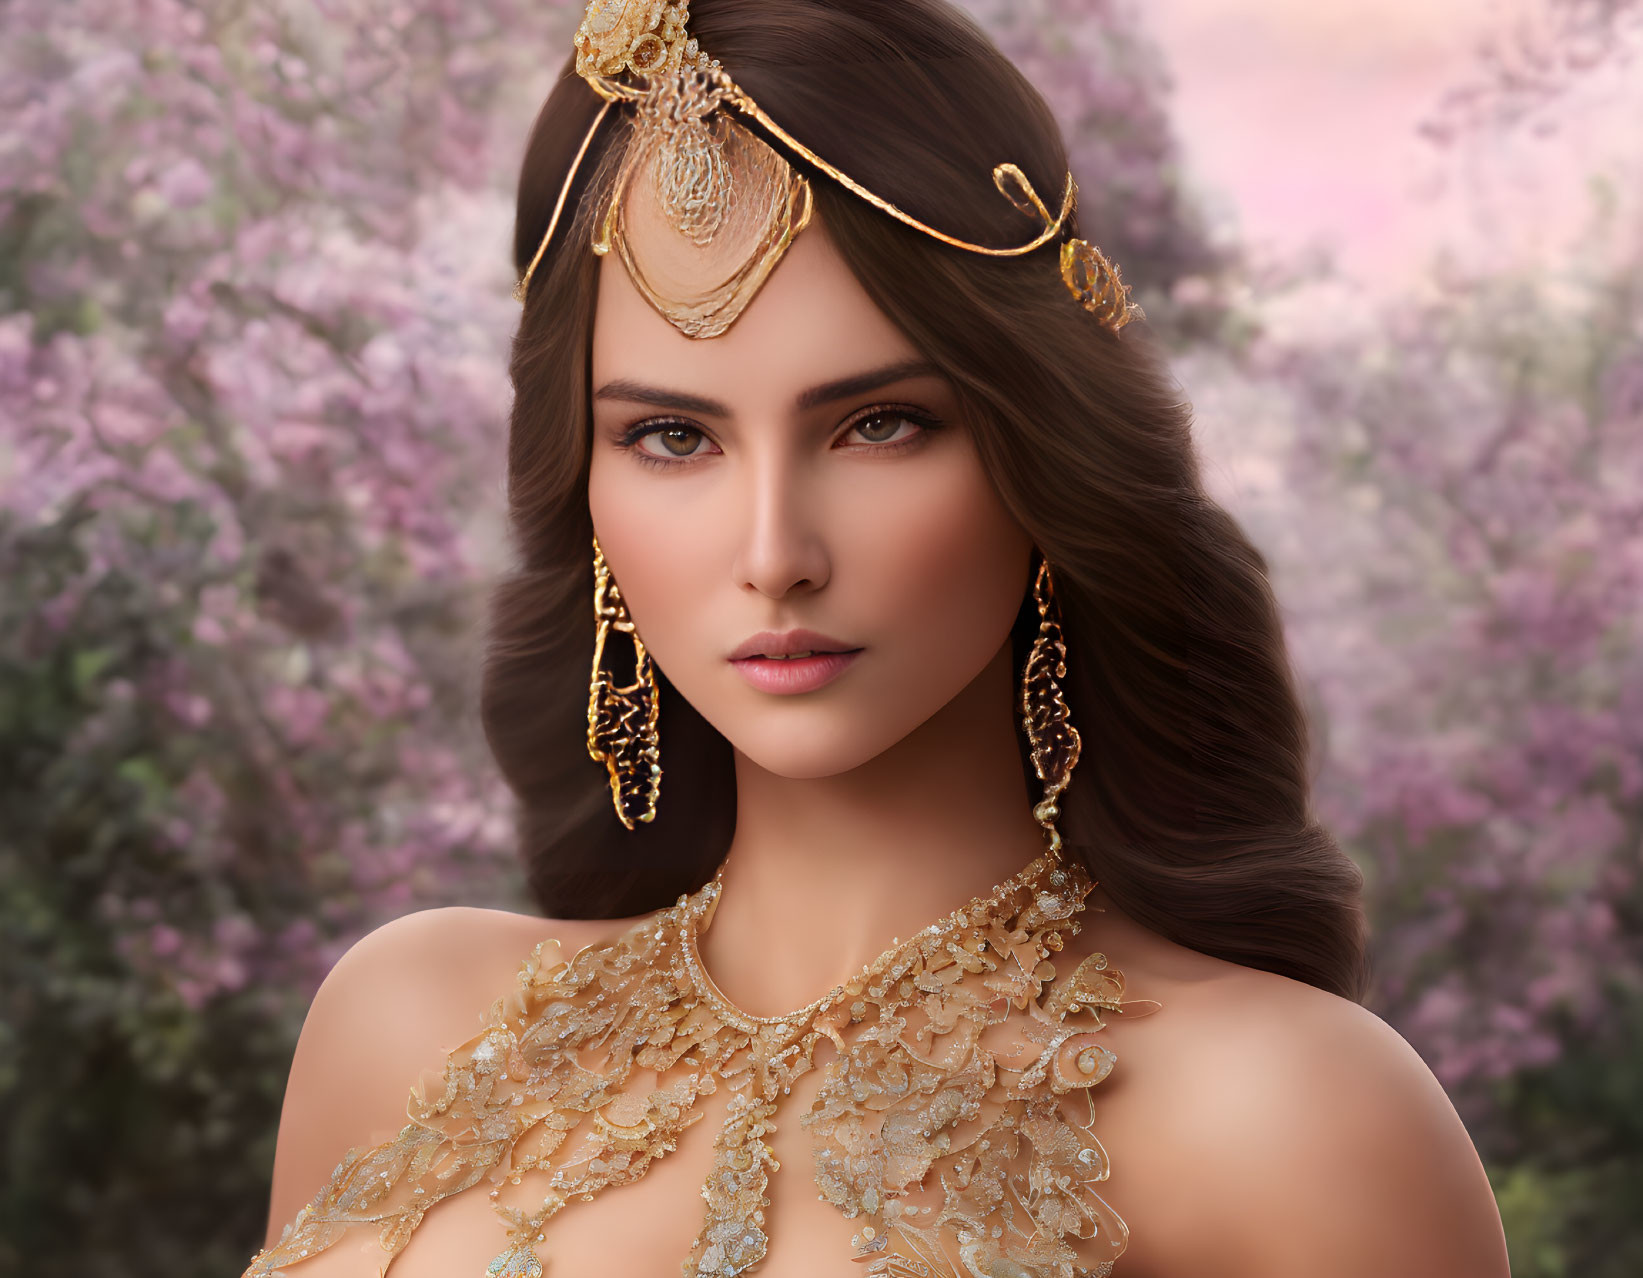 Digital portrait of woman in ornate gold jewelry with headpiece, earrings, necklace against bloom-filled background